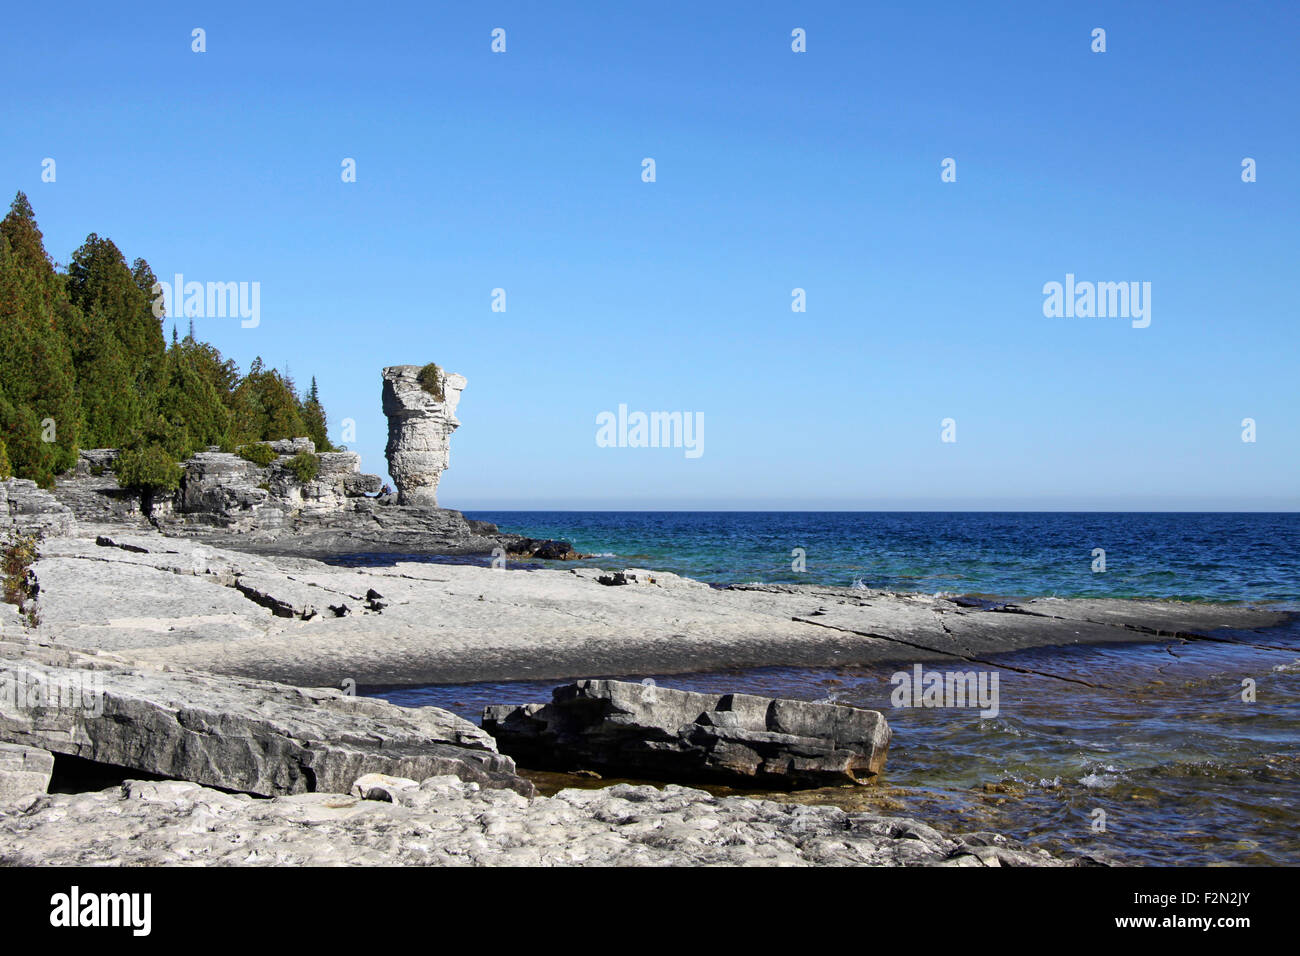 Flowerpot rock formation (natural sea stacks) in the distance, Flowerpot Island, Tobermory, Ontario, Canada. Stock Photo